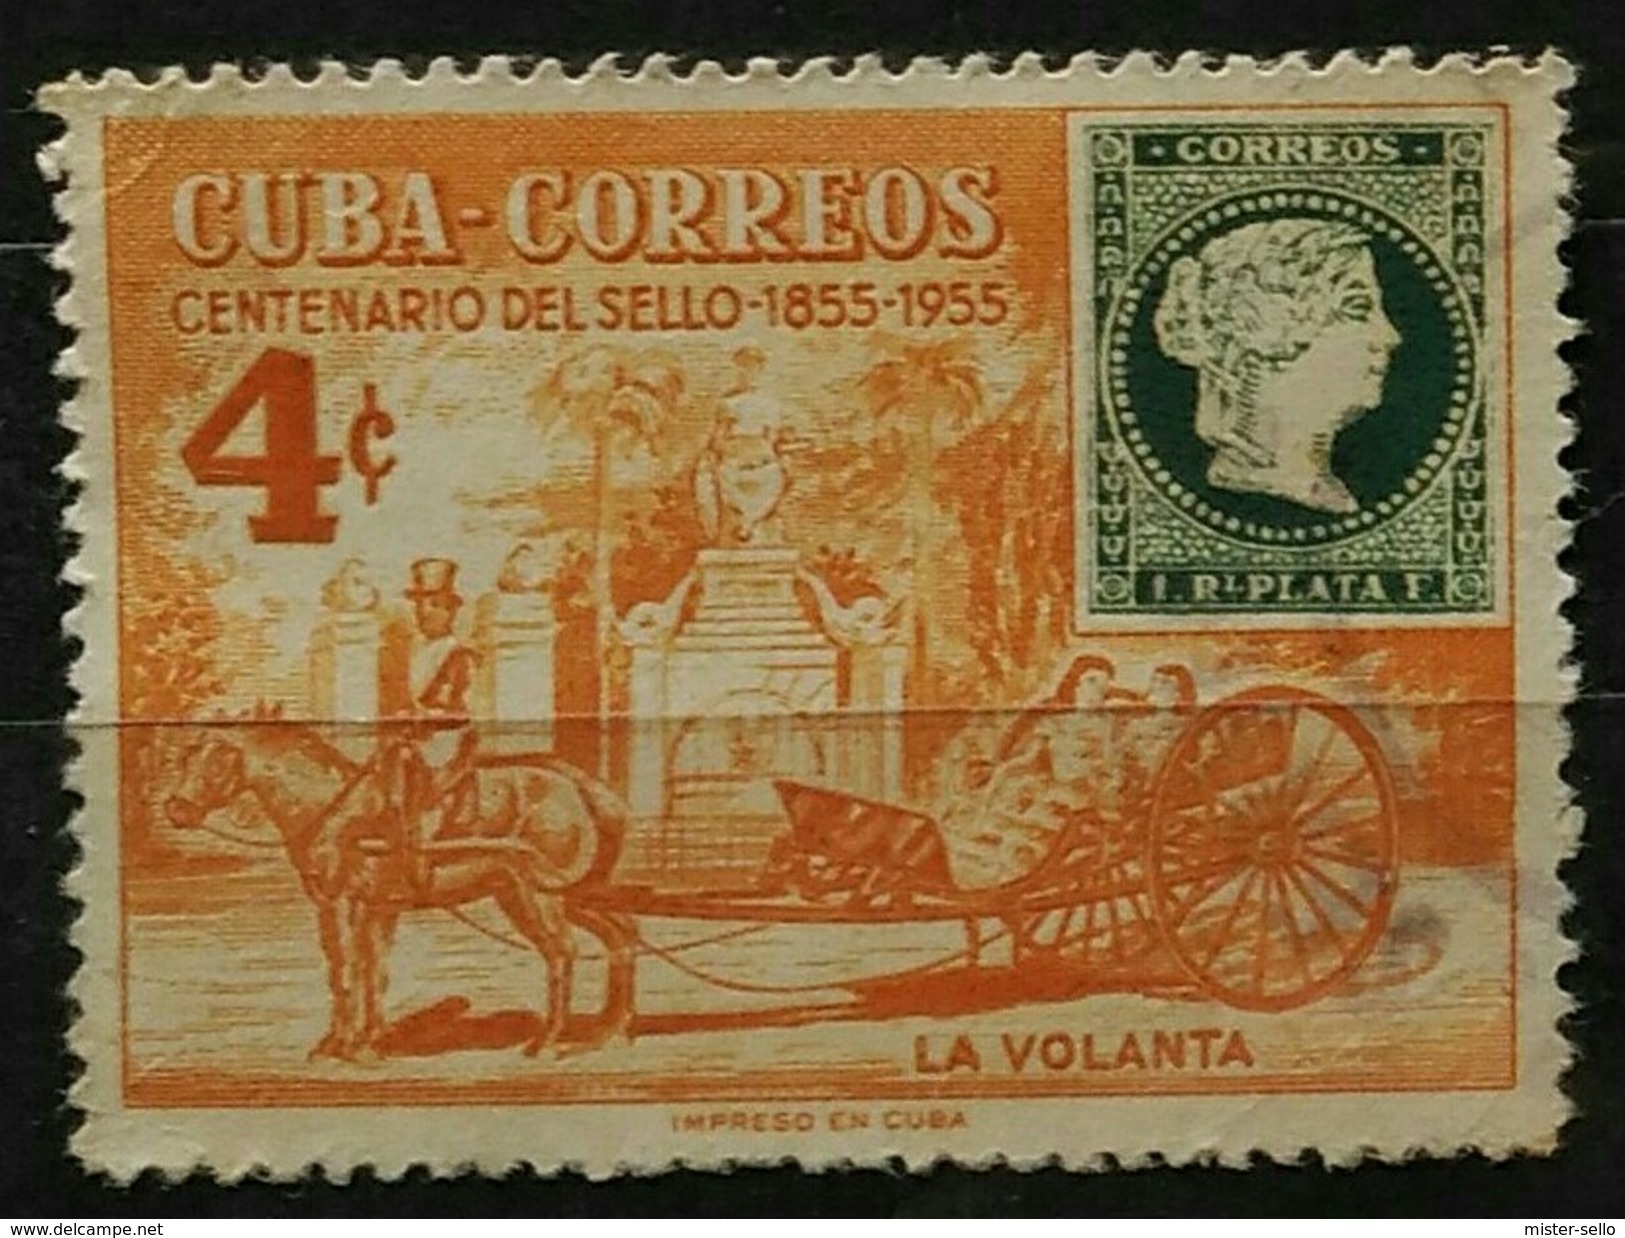 CU BA 1955 The 100th Anniversary Of The First Cuban Postage Stamps. USADO - USED. - Usados